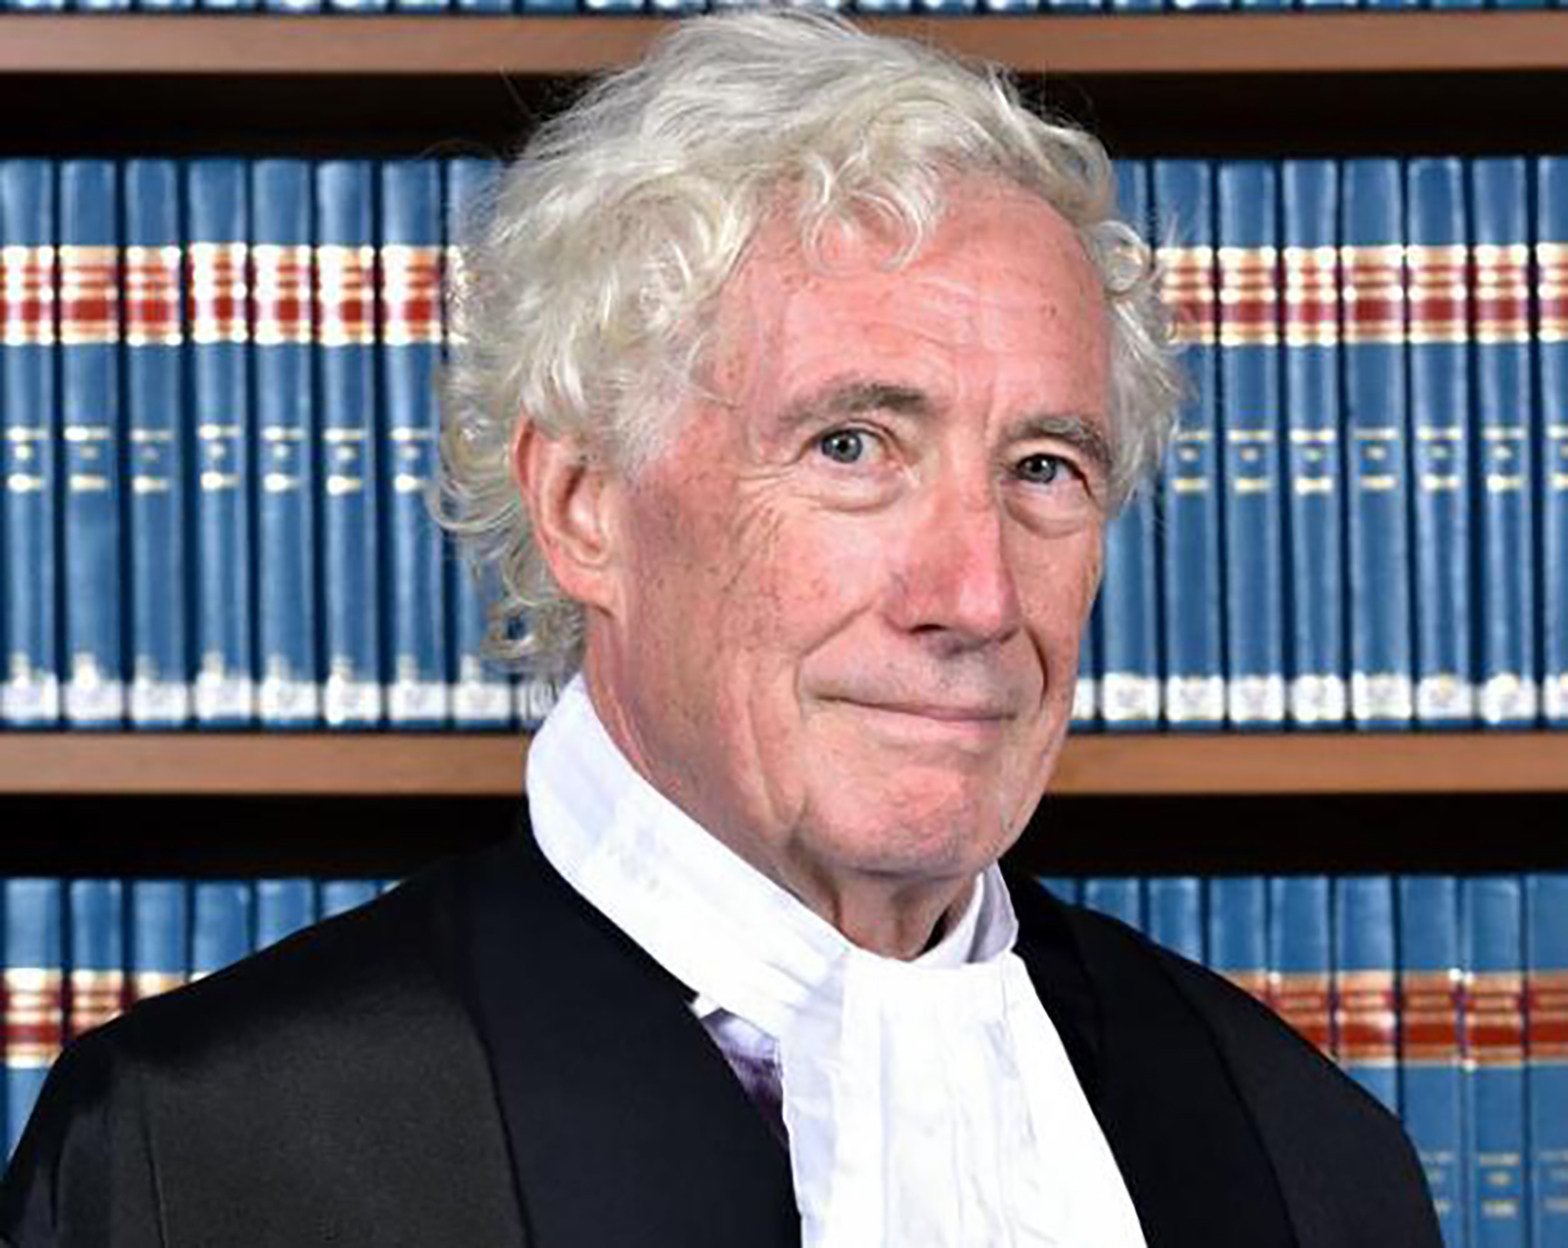 Beijing has condemned Jonathan Sumption, who recently quit Hong Kong’s top court. Photo: Handout